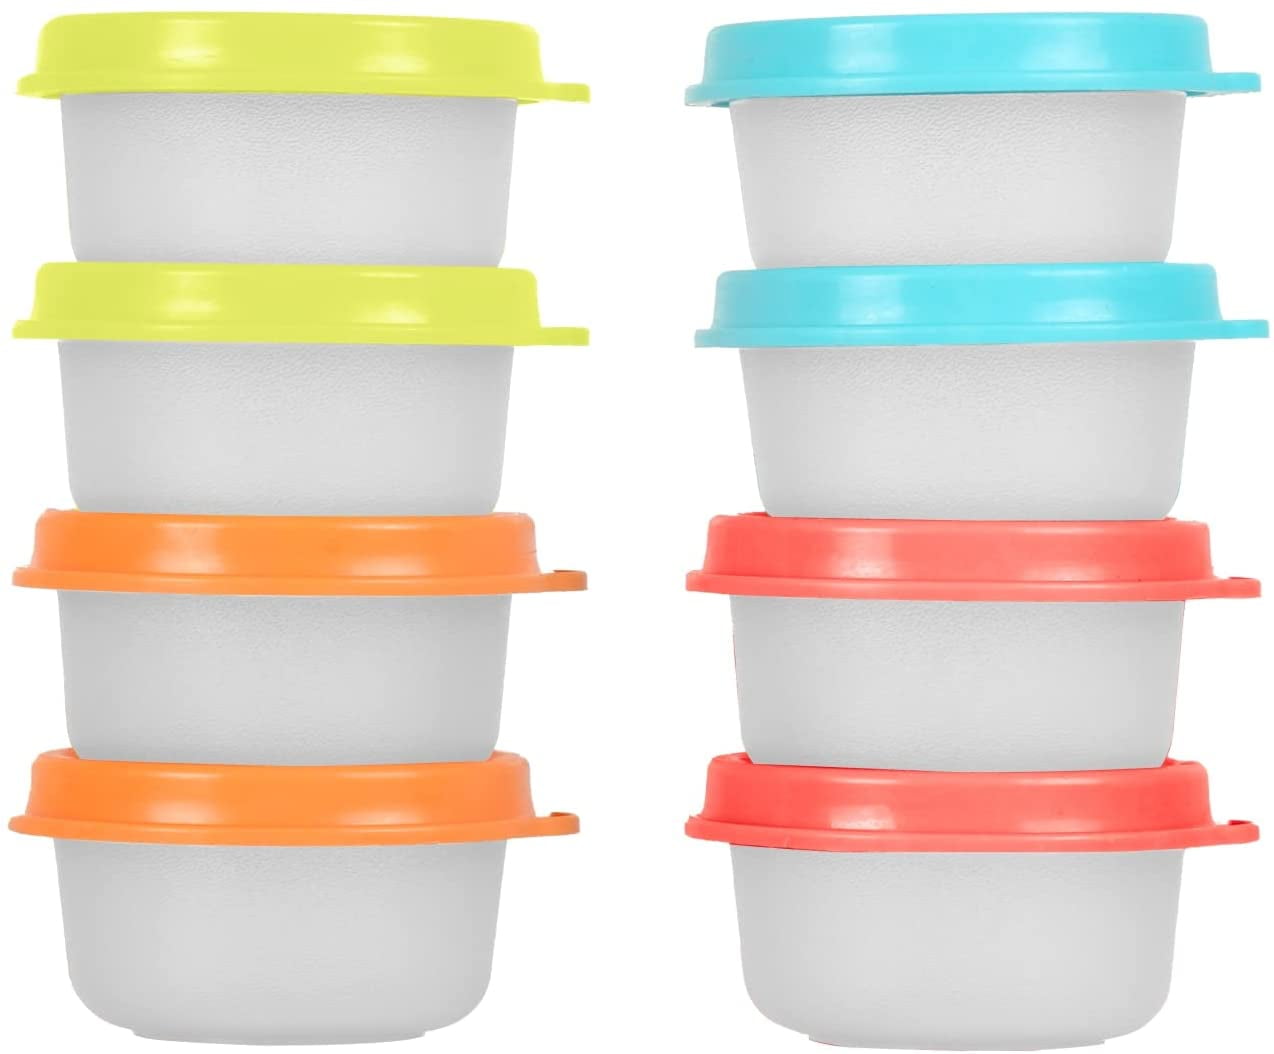 Condiment Cups container with Lids- 8 pk. 1 oz.Salad Dressing Container to  go Small Food Storage Containers with Lids- Sauce Cups Leak proof Reusable  Plastic BPA free for Lunch Box Picnic Travel 